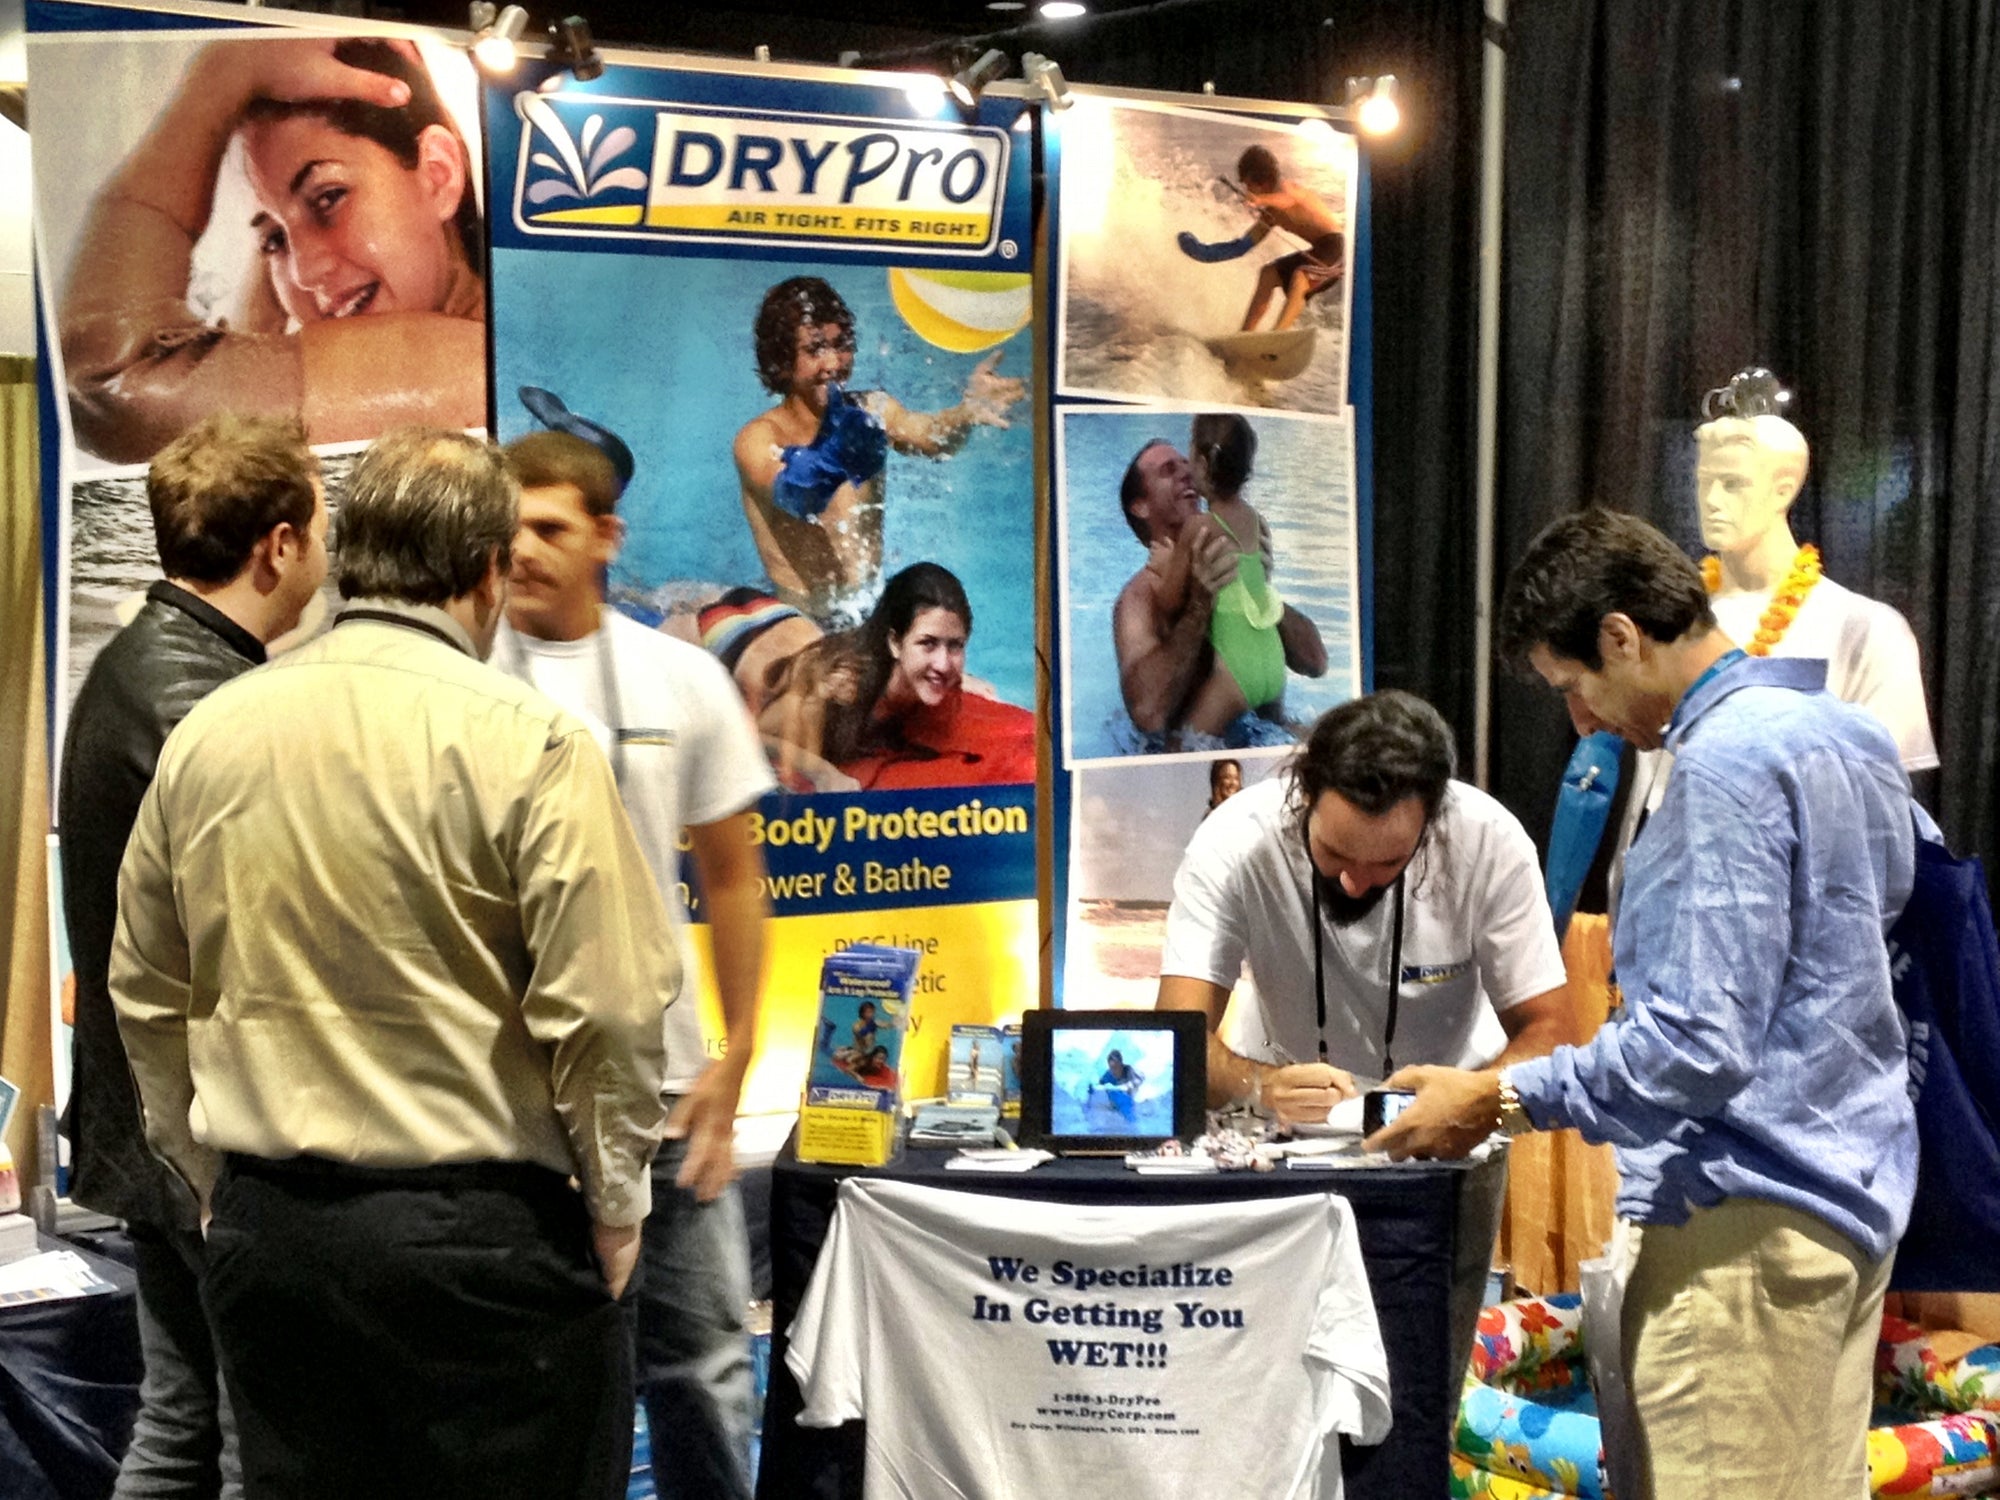 DryPRO Waterproof cast cover kids and adults at Medtrade